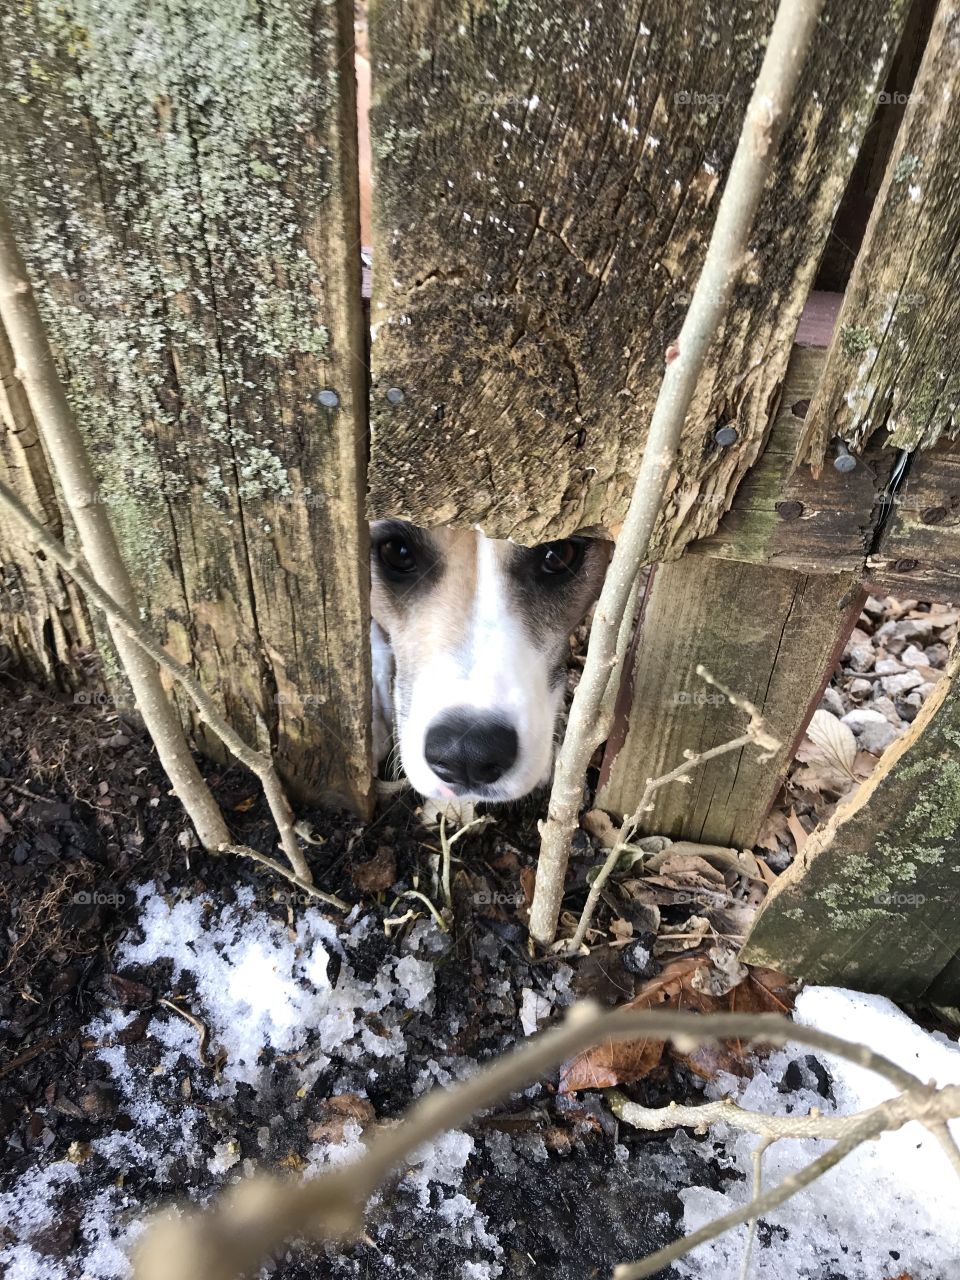 The neighbors dog looking through a hole in the fence